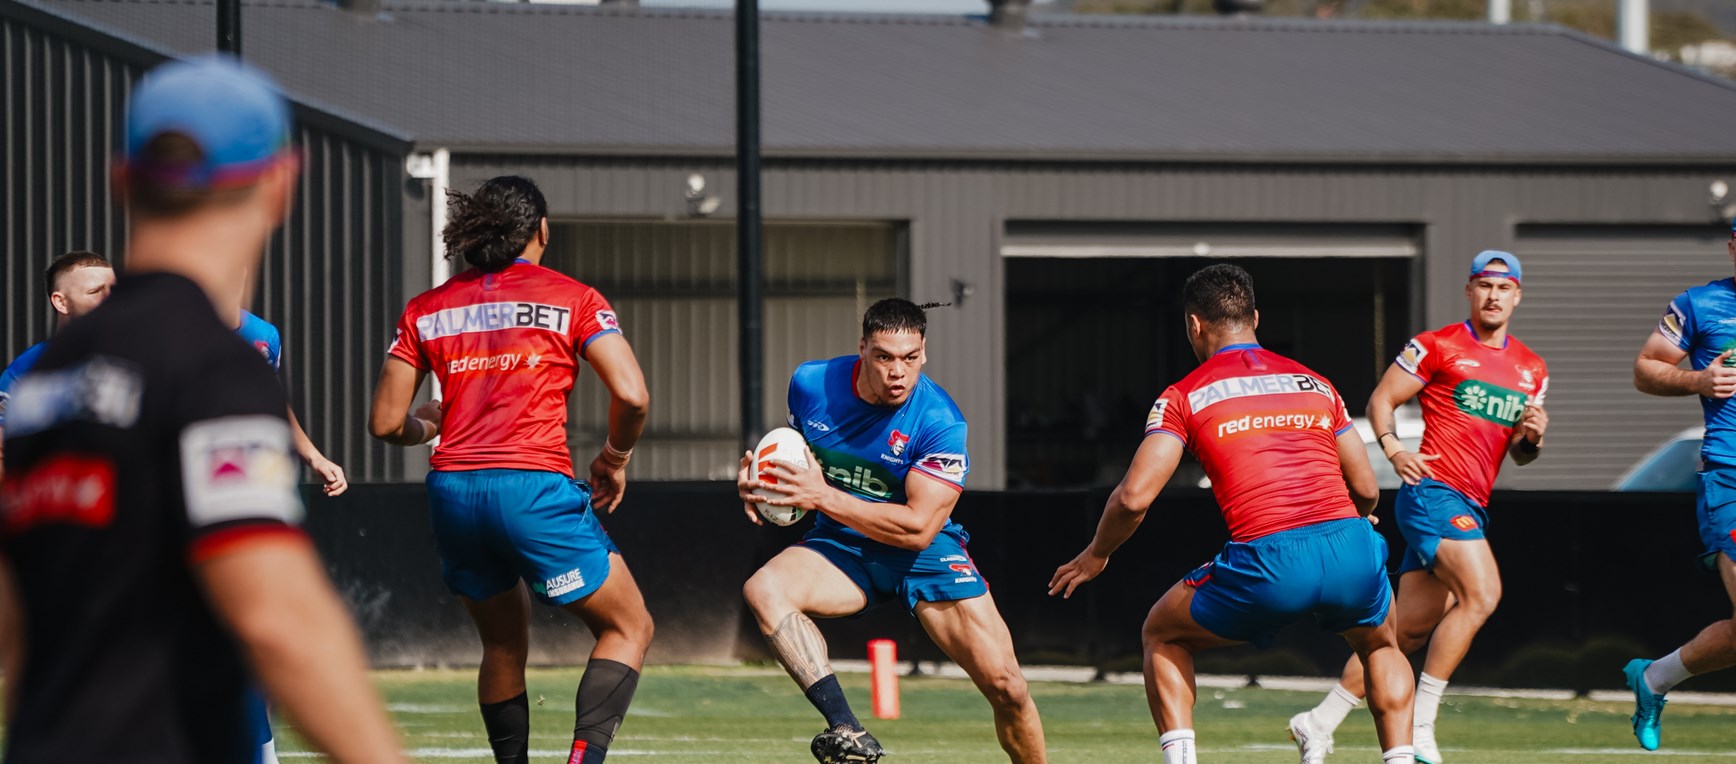 Gallery: Knights prepare for Dolphins clash